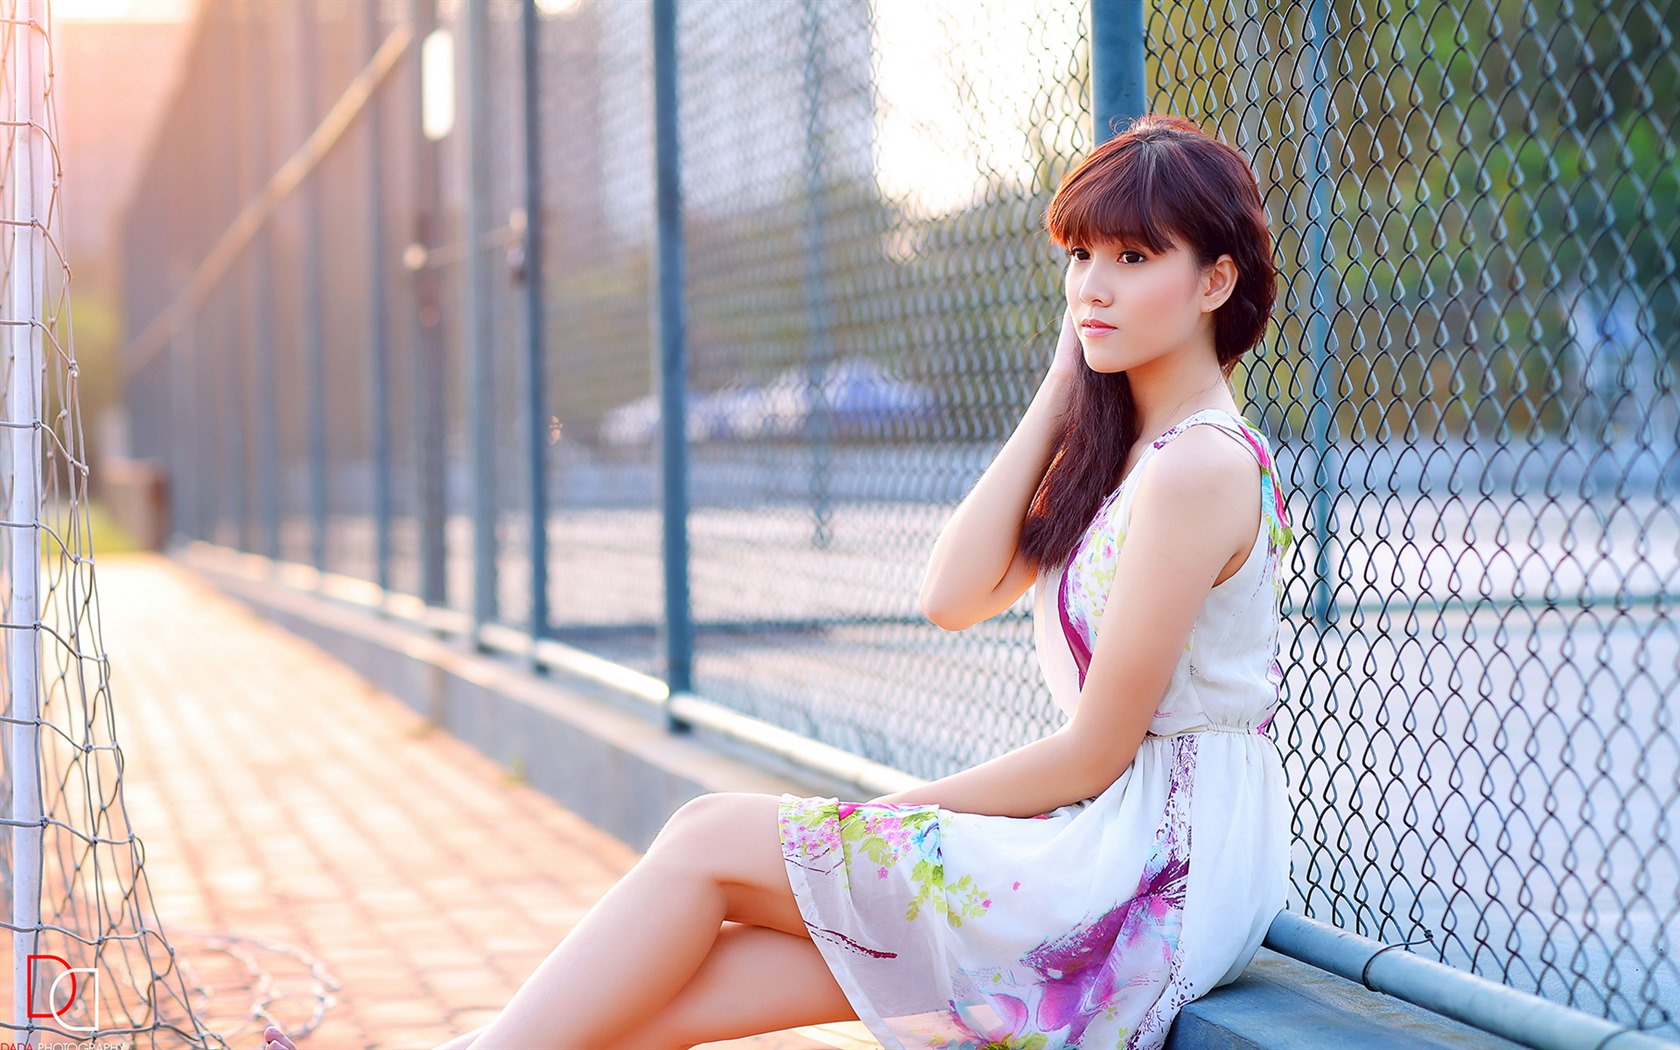 Pure and lovely young Asian girl HD wallpapers collection (5) #31 - 1680x1050